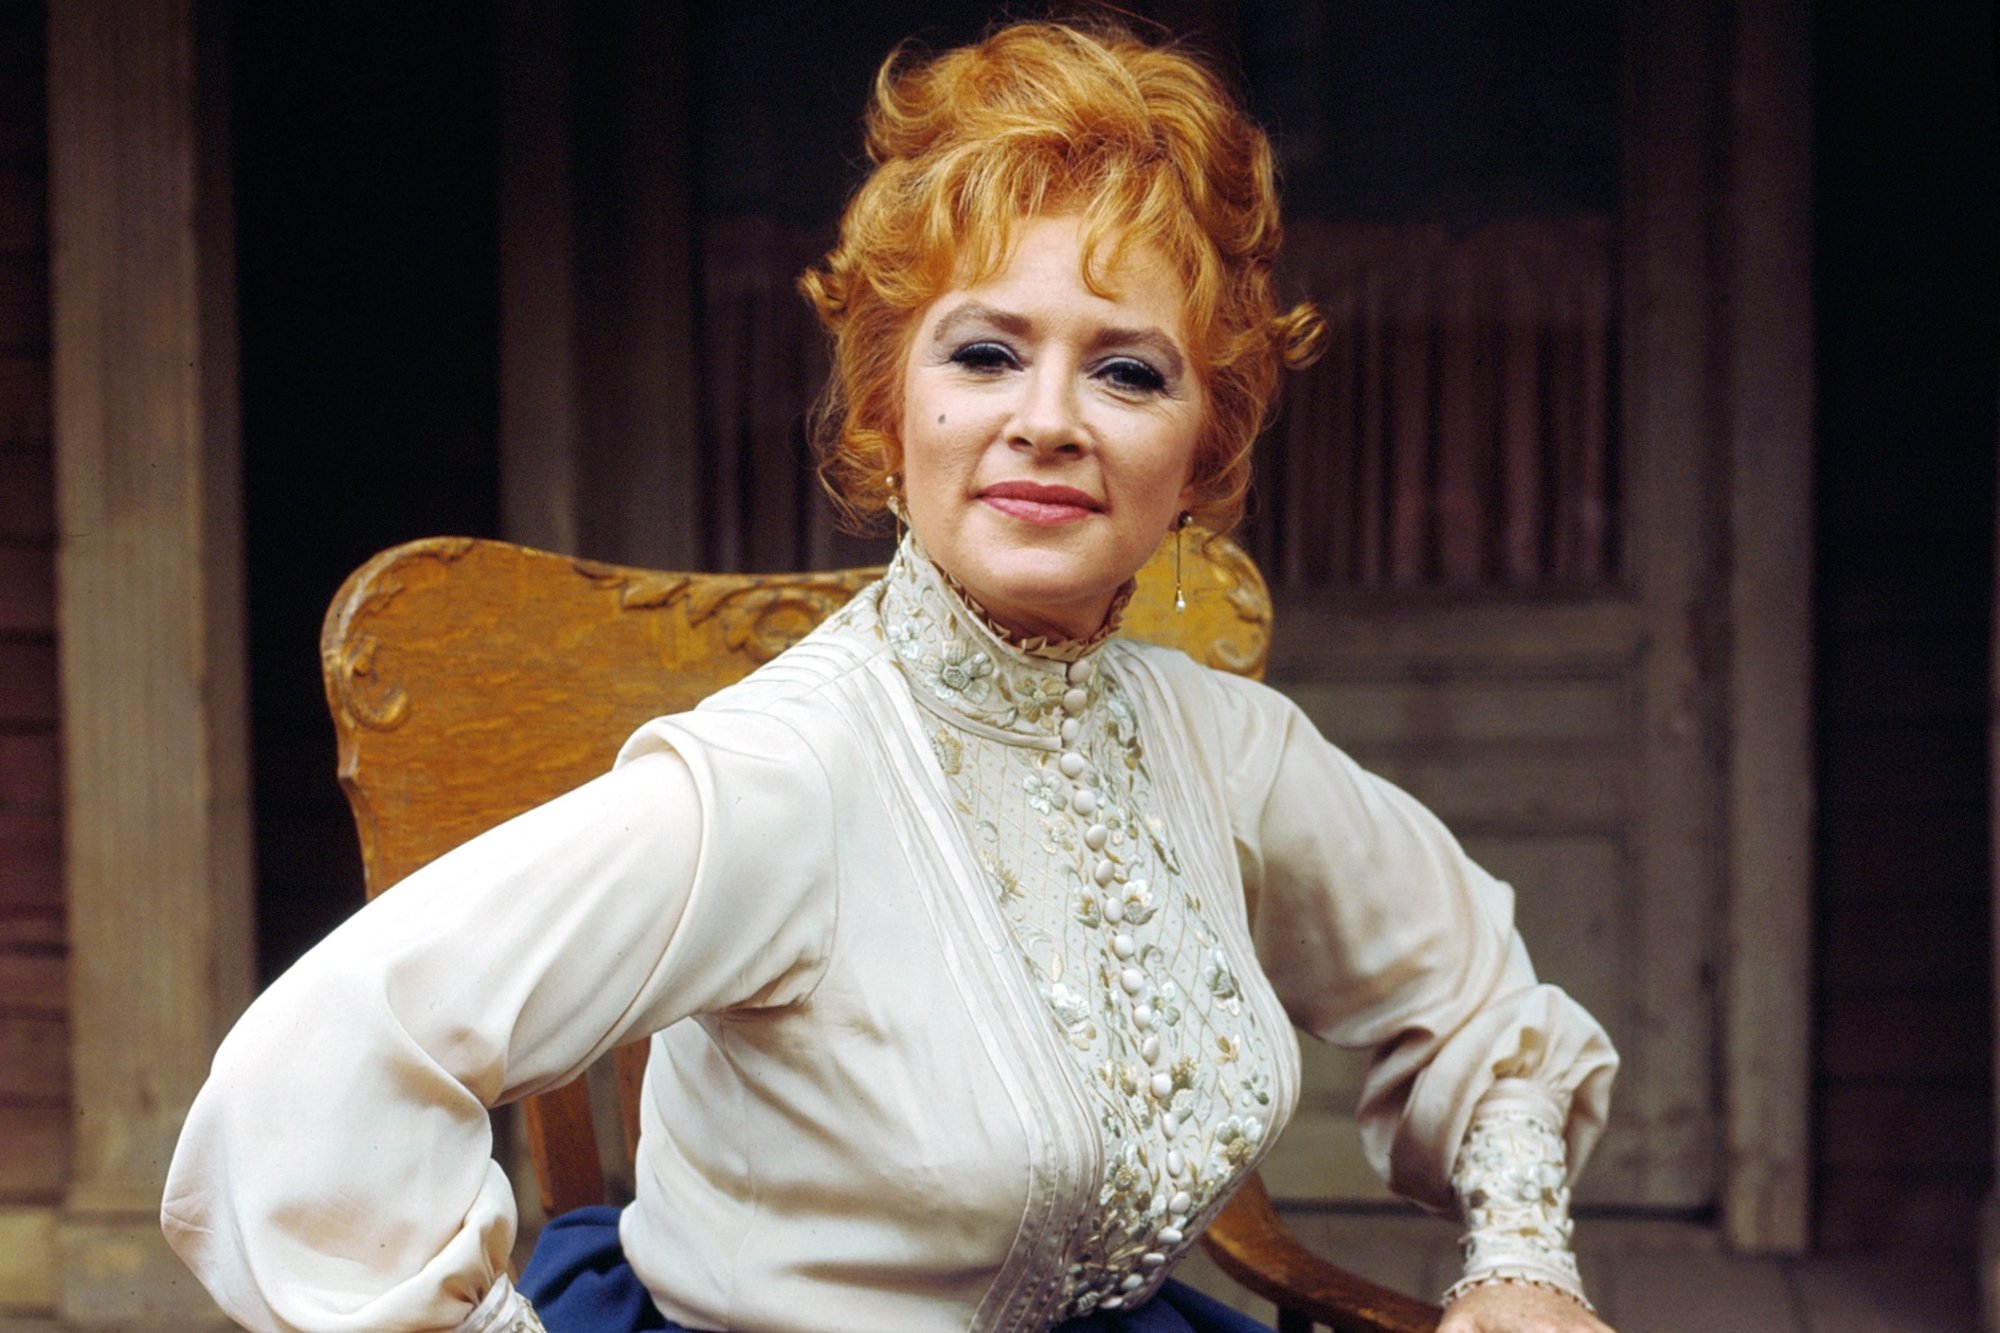 ‘Gunsmoke’: Amanda Blake’s Official Cause of Death Wasn’t What Her Friends Told Everyone